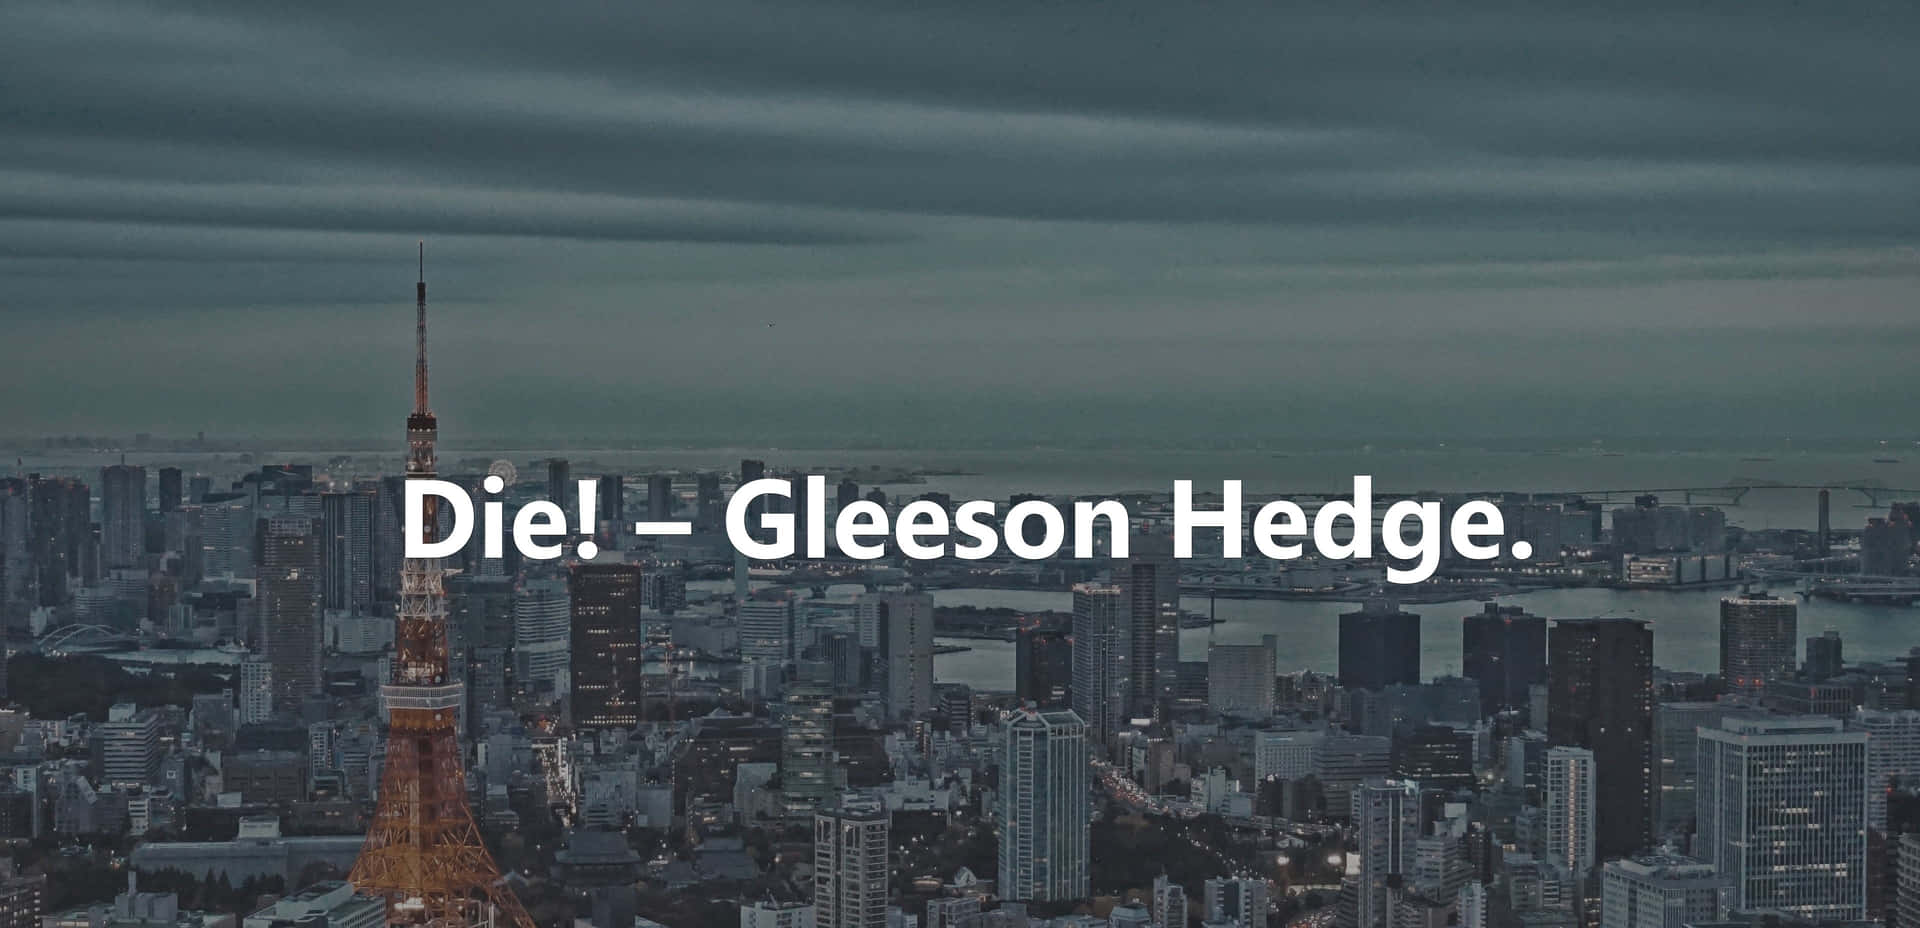 Die Gleston Hedge - A Cityscape With The Words Die Gleston Hedge Wallpaper